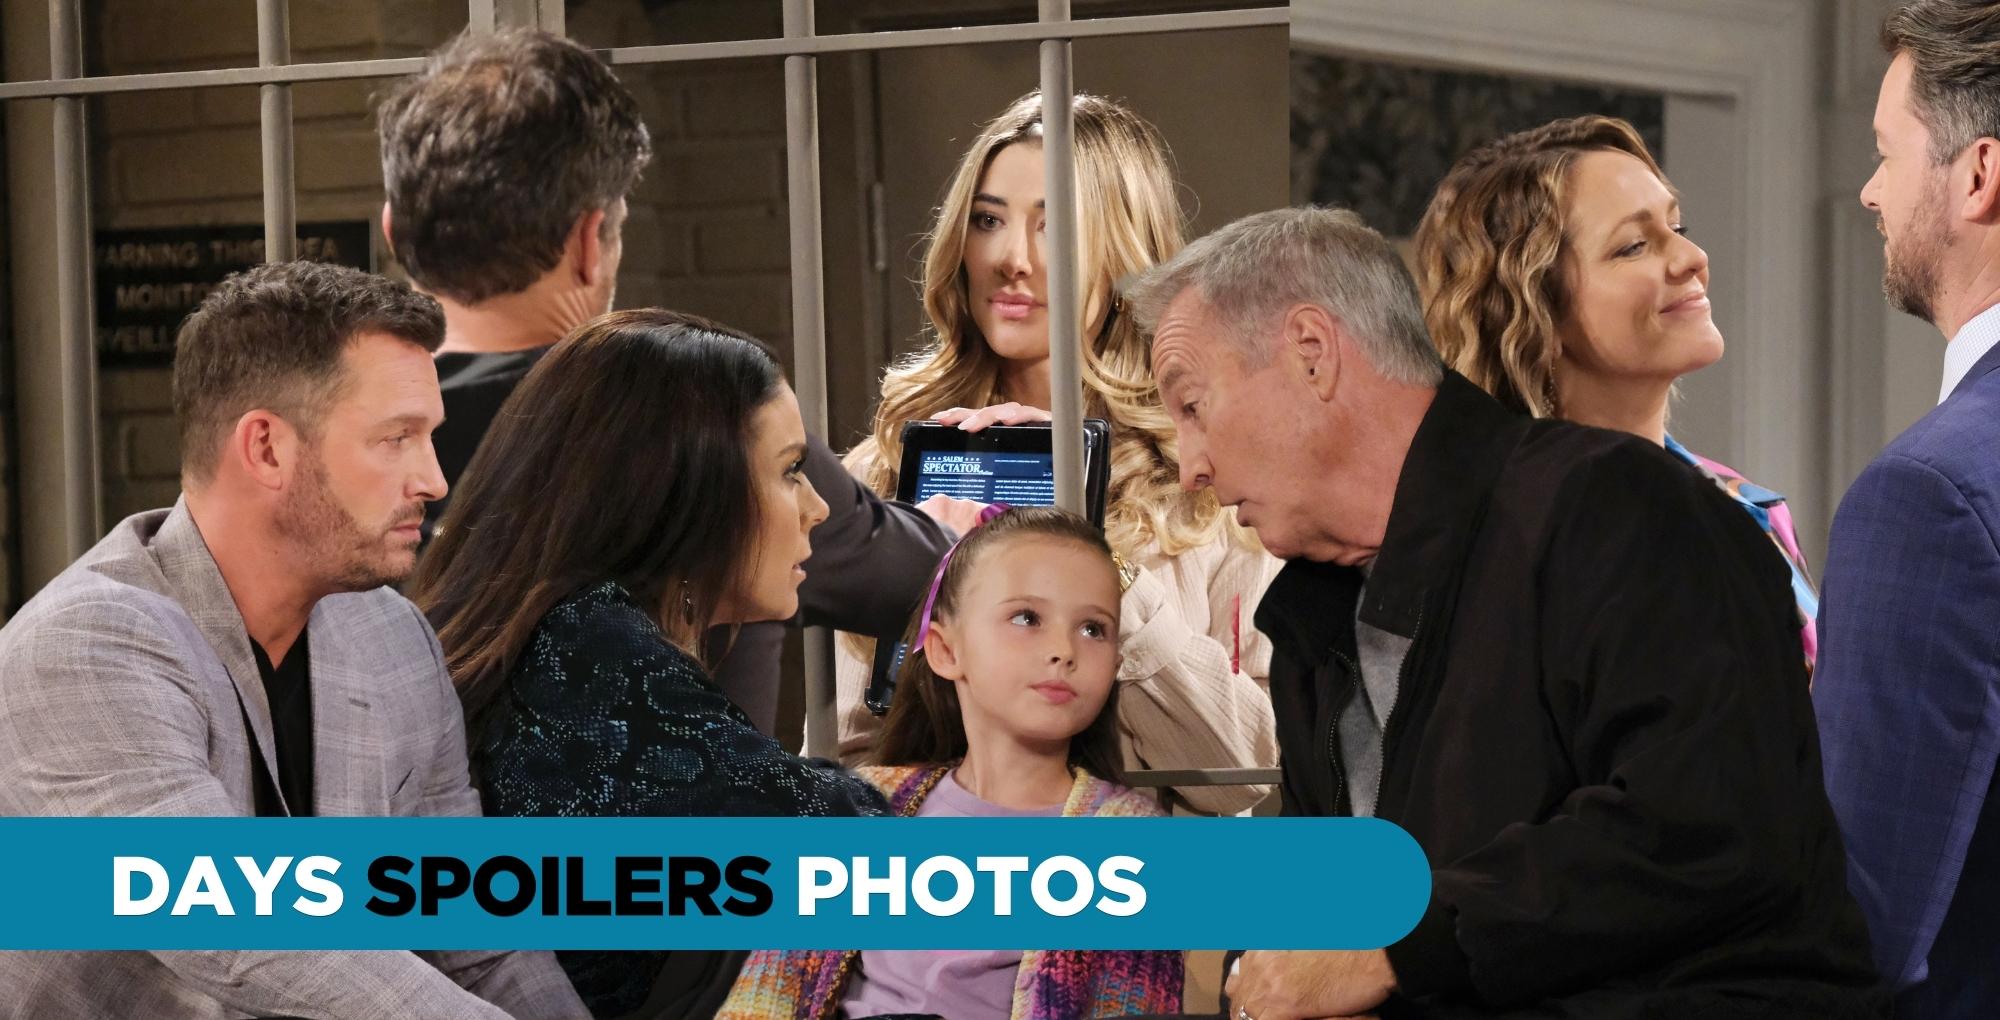 days spoilers photos for tuesday, march 7, 2023.